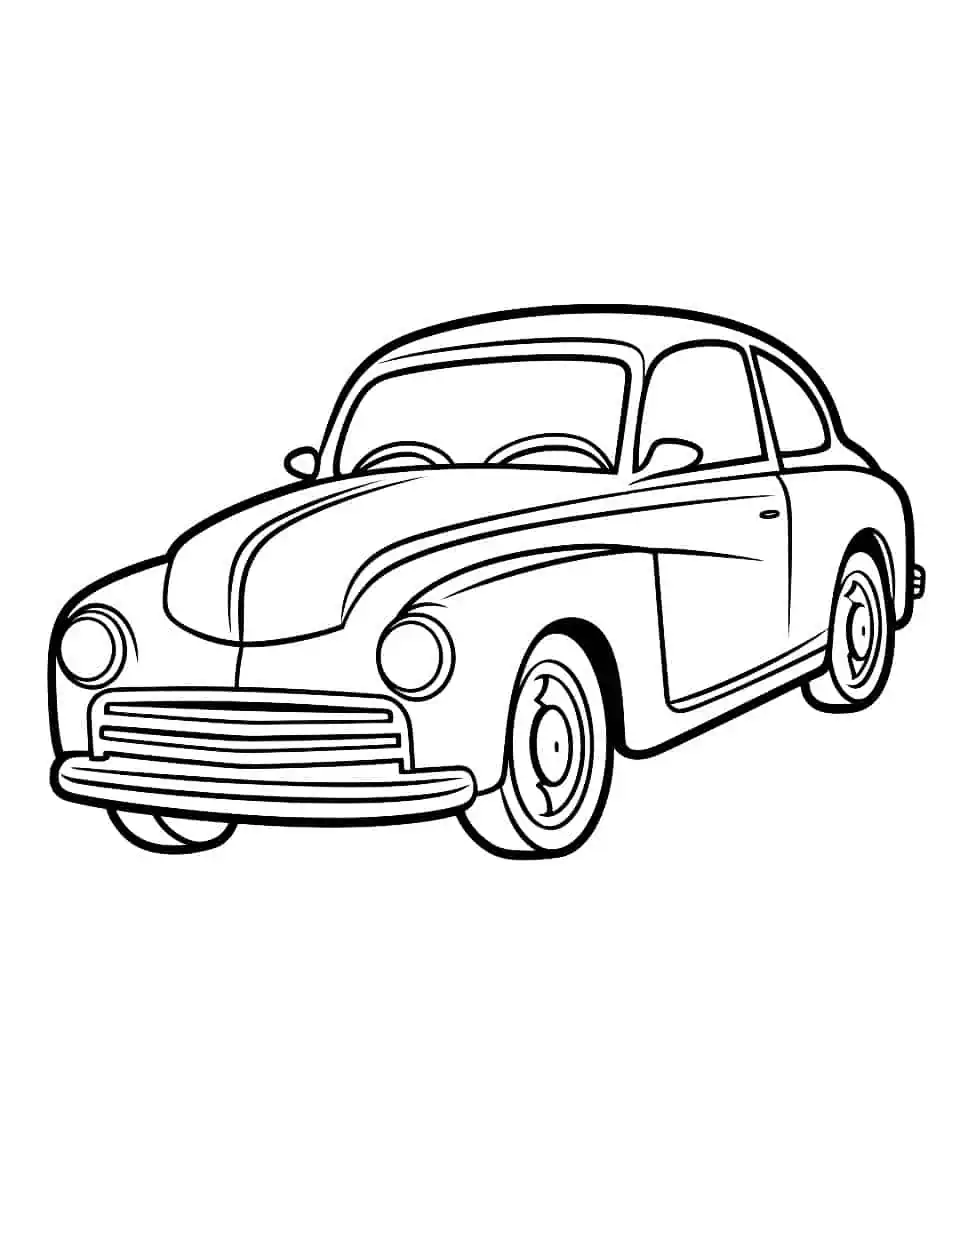 Fantastic Ford Car Coloring Page - An easy, simple image of a Ford car for preschool kids to color.